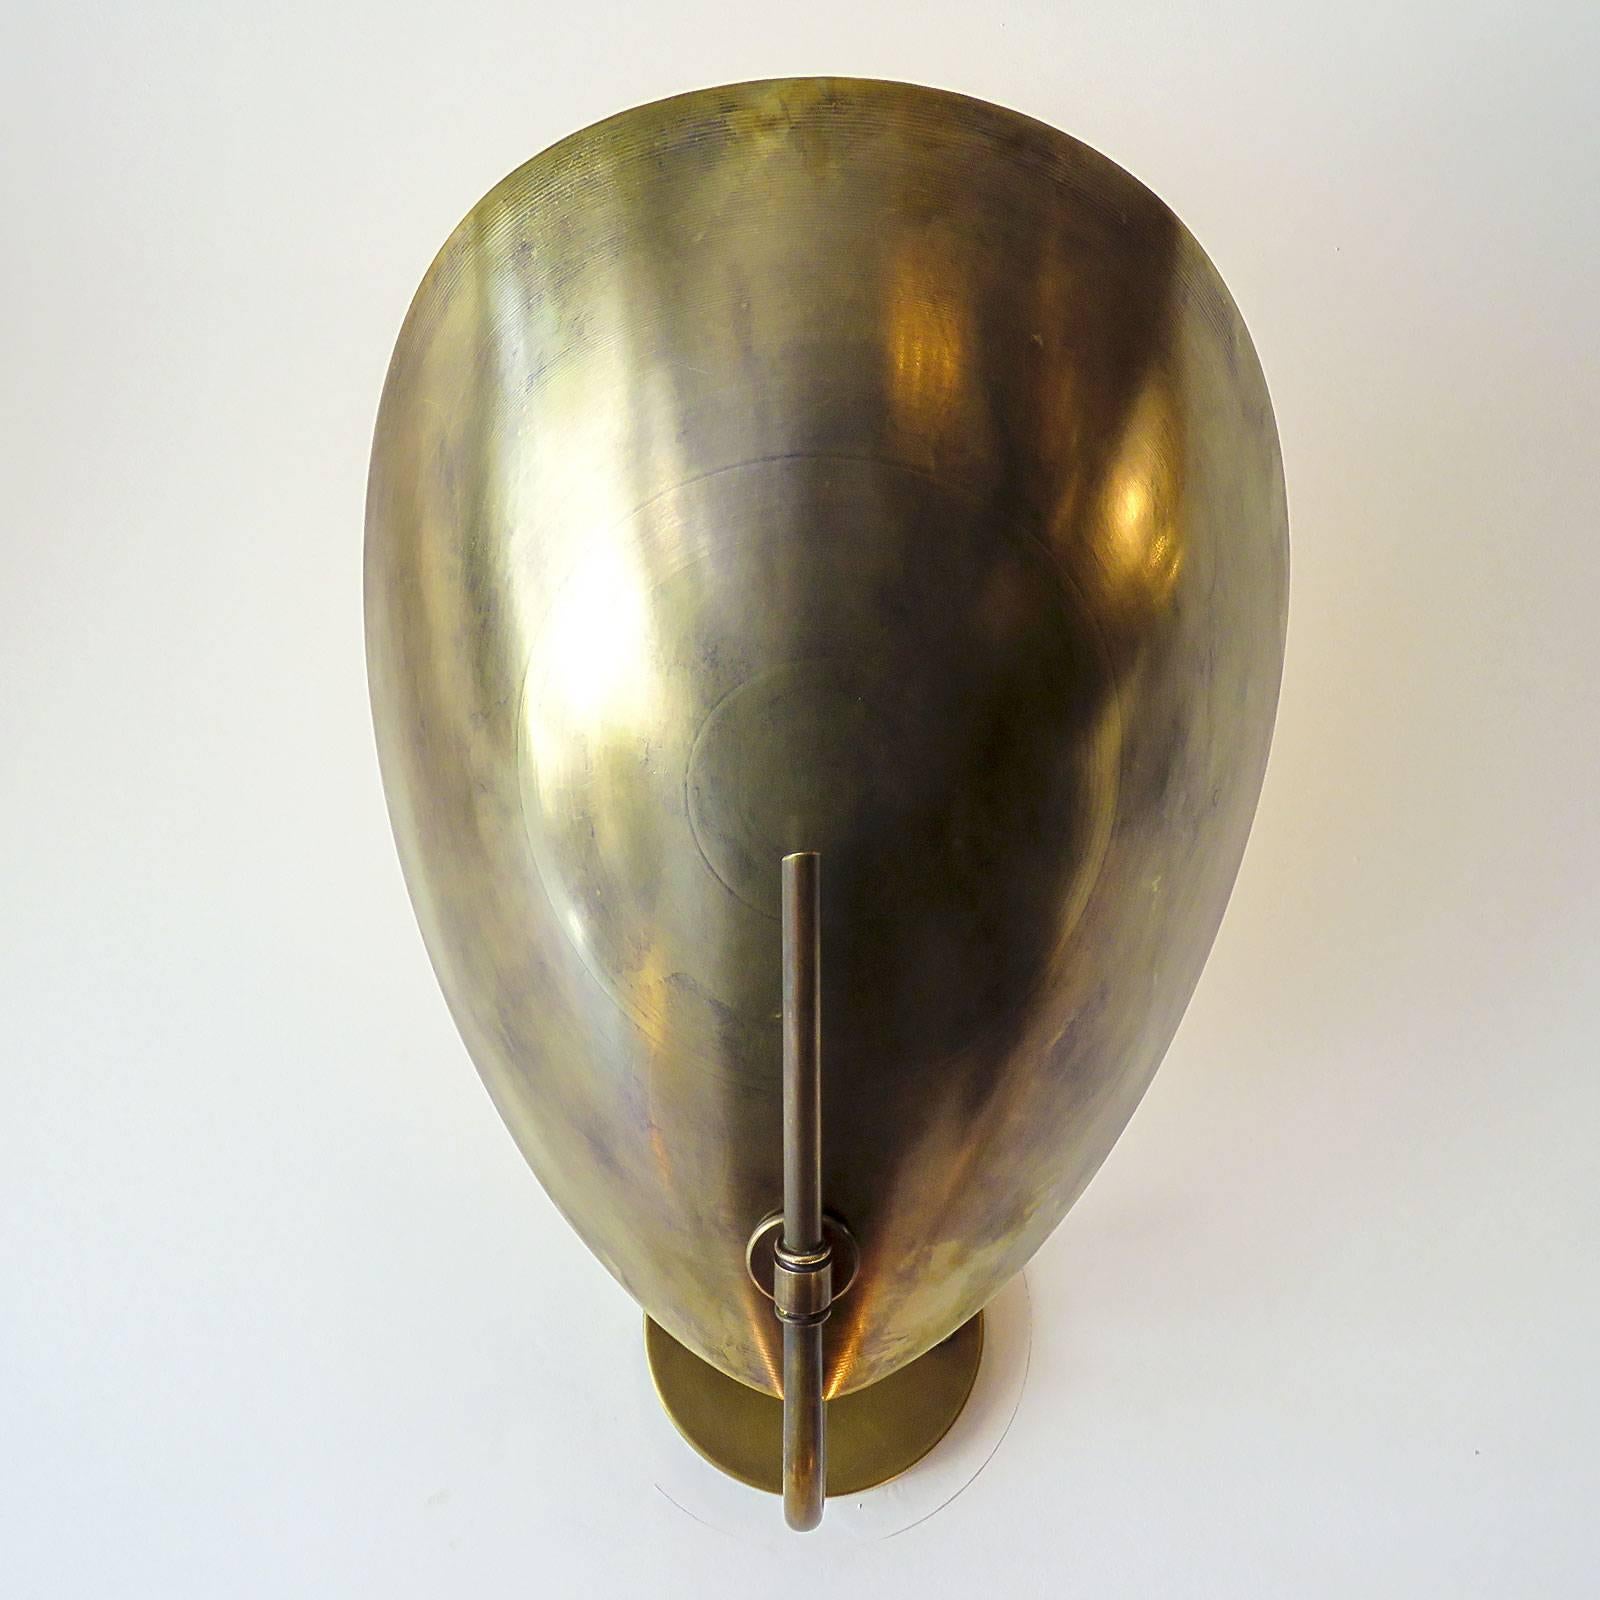 Elegant Beetle wall lights designed by Gallery L7, handcrafted and finished in Los Angeles from American brass. Reminiscent of stag beetle armor, in an aged raw brass finish, also available with individual on/off pull switch. One E26 socket per